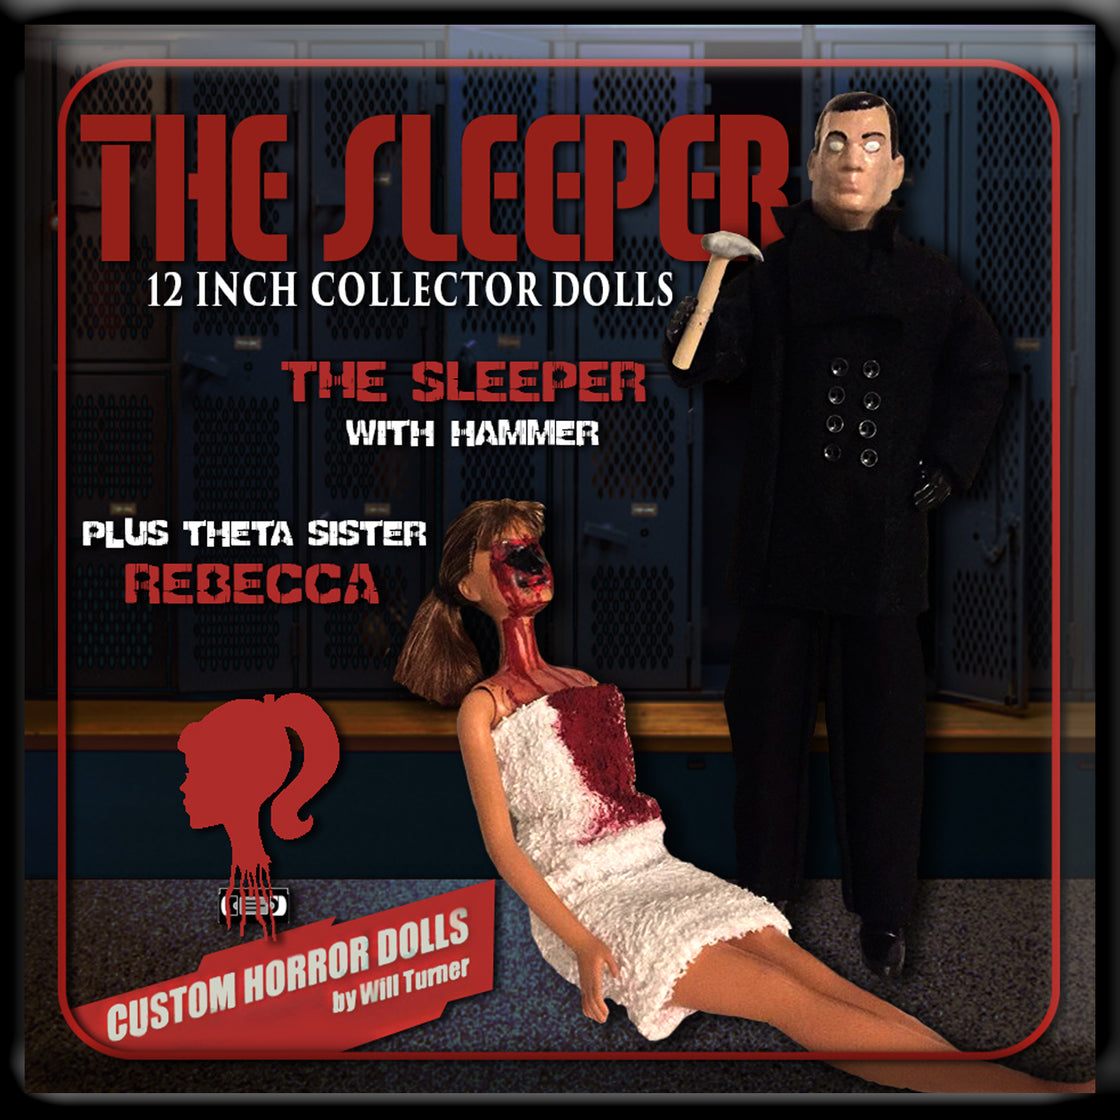 The Sleeper 12 inch Collector Doll Set